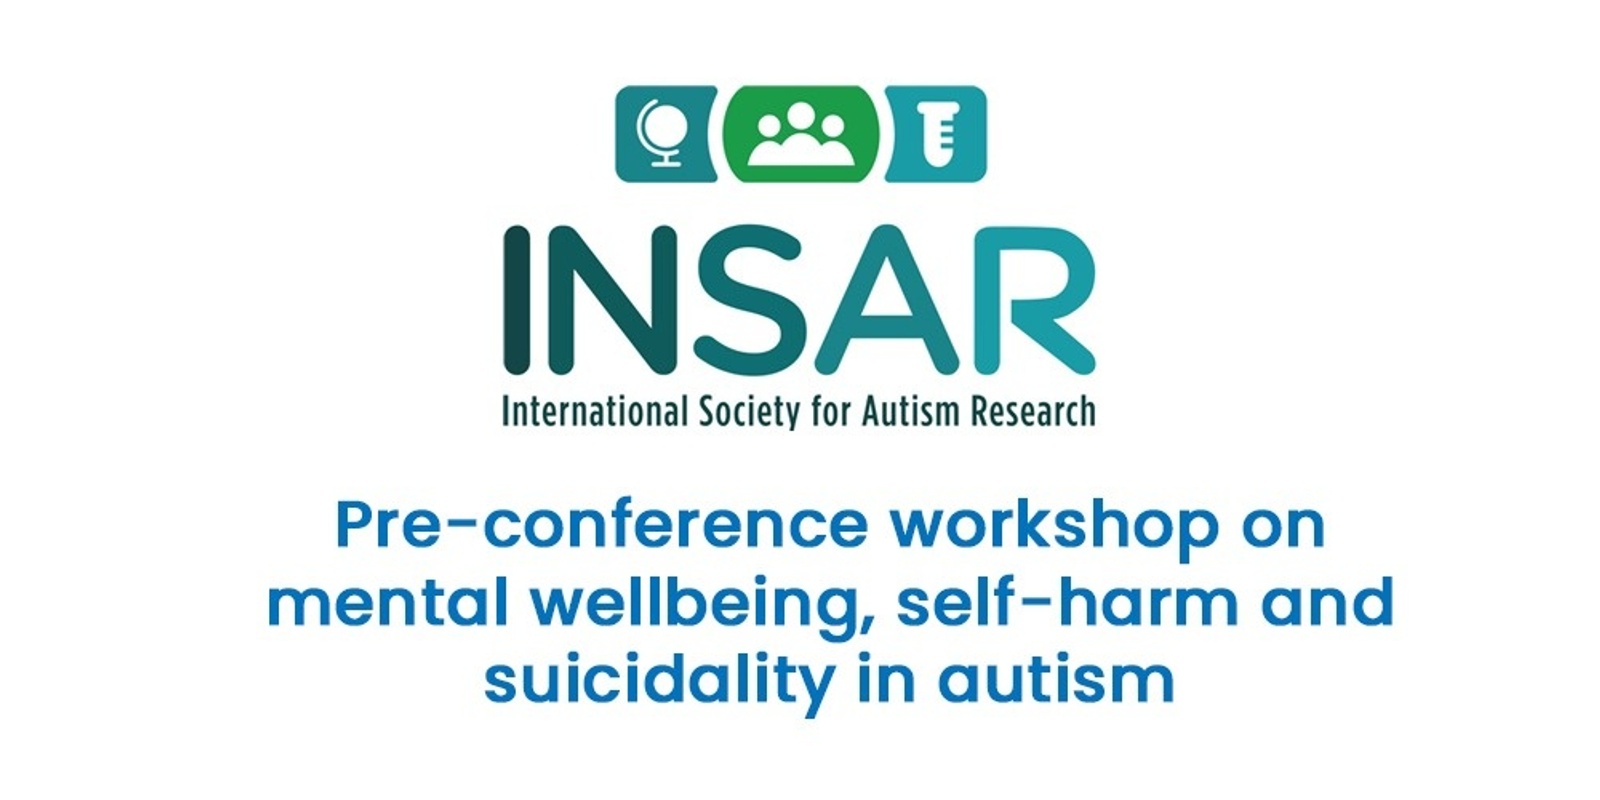 Banner image for INSAR pre-conference workshop on mental wellbeing, self-harm and suicidality in autism